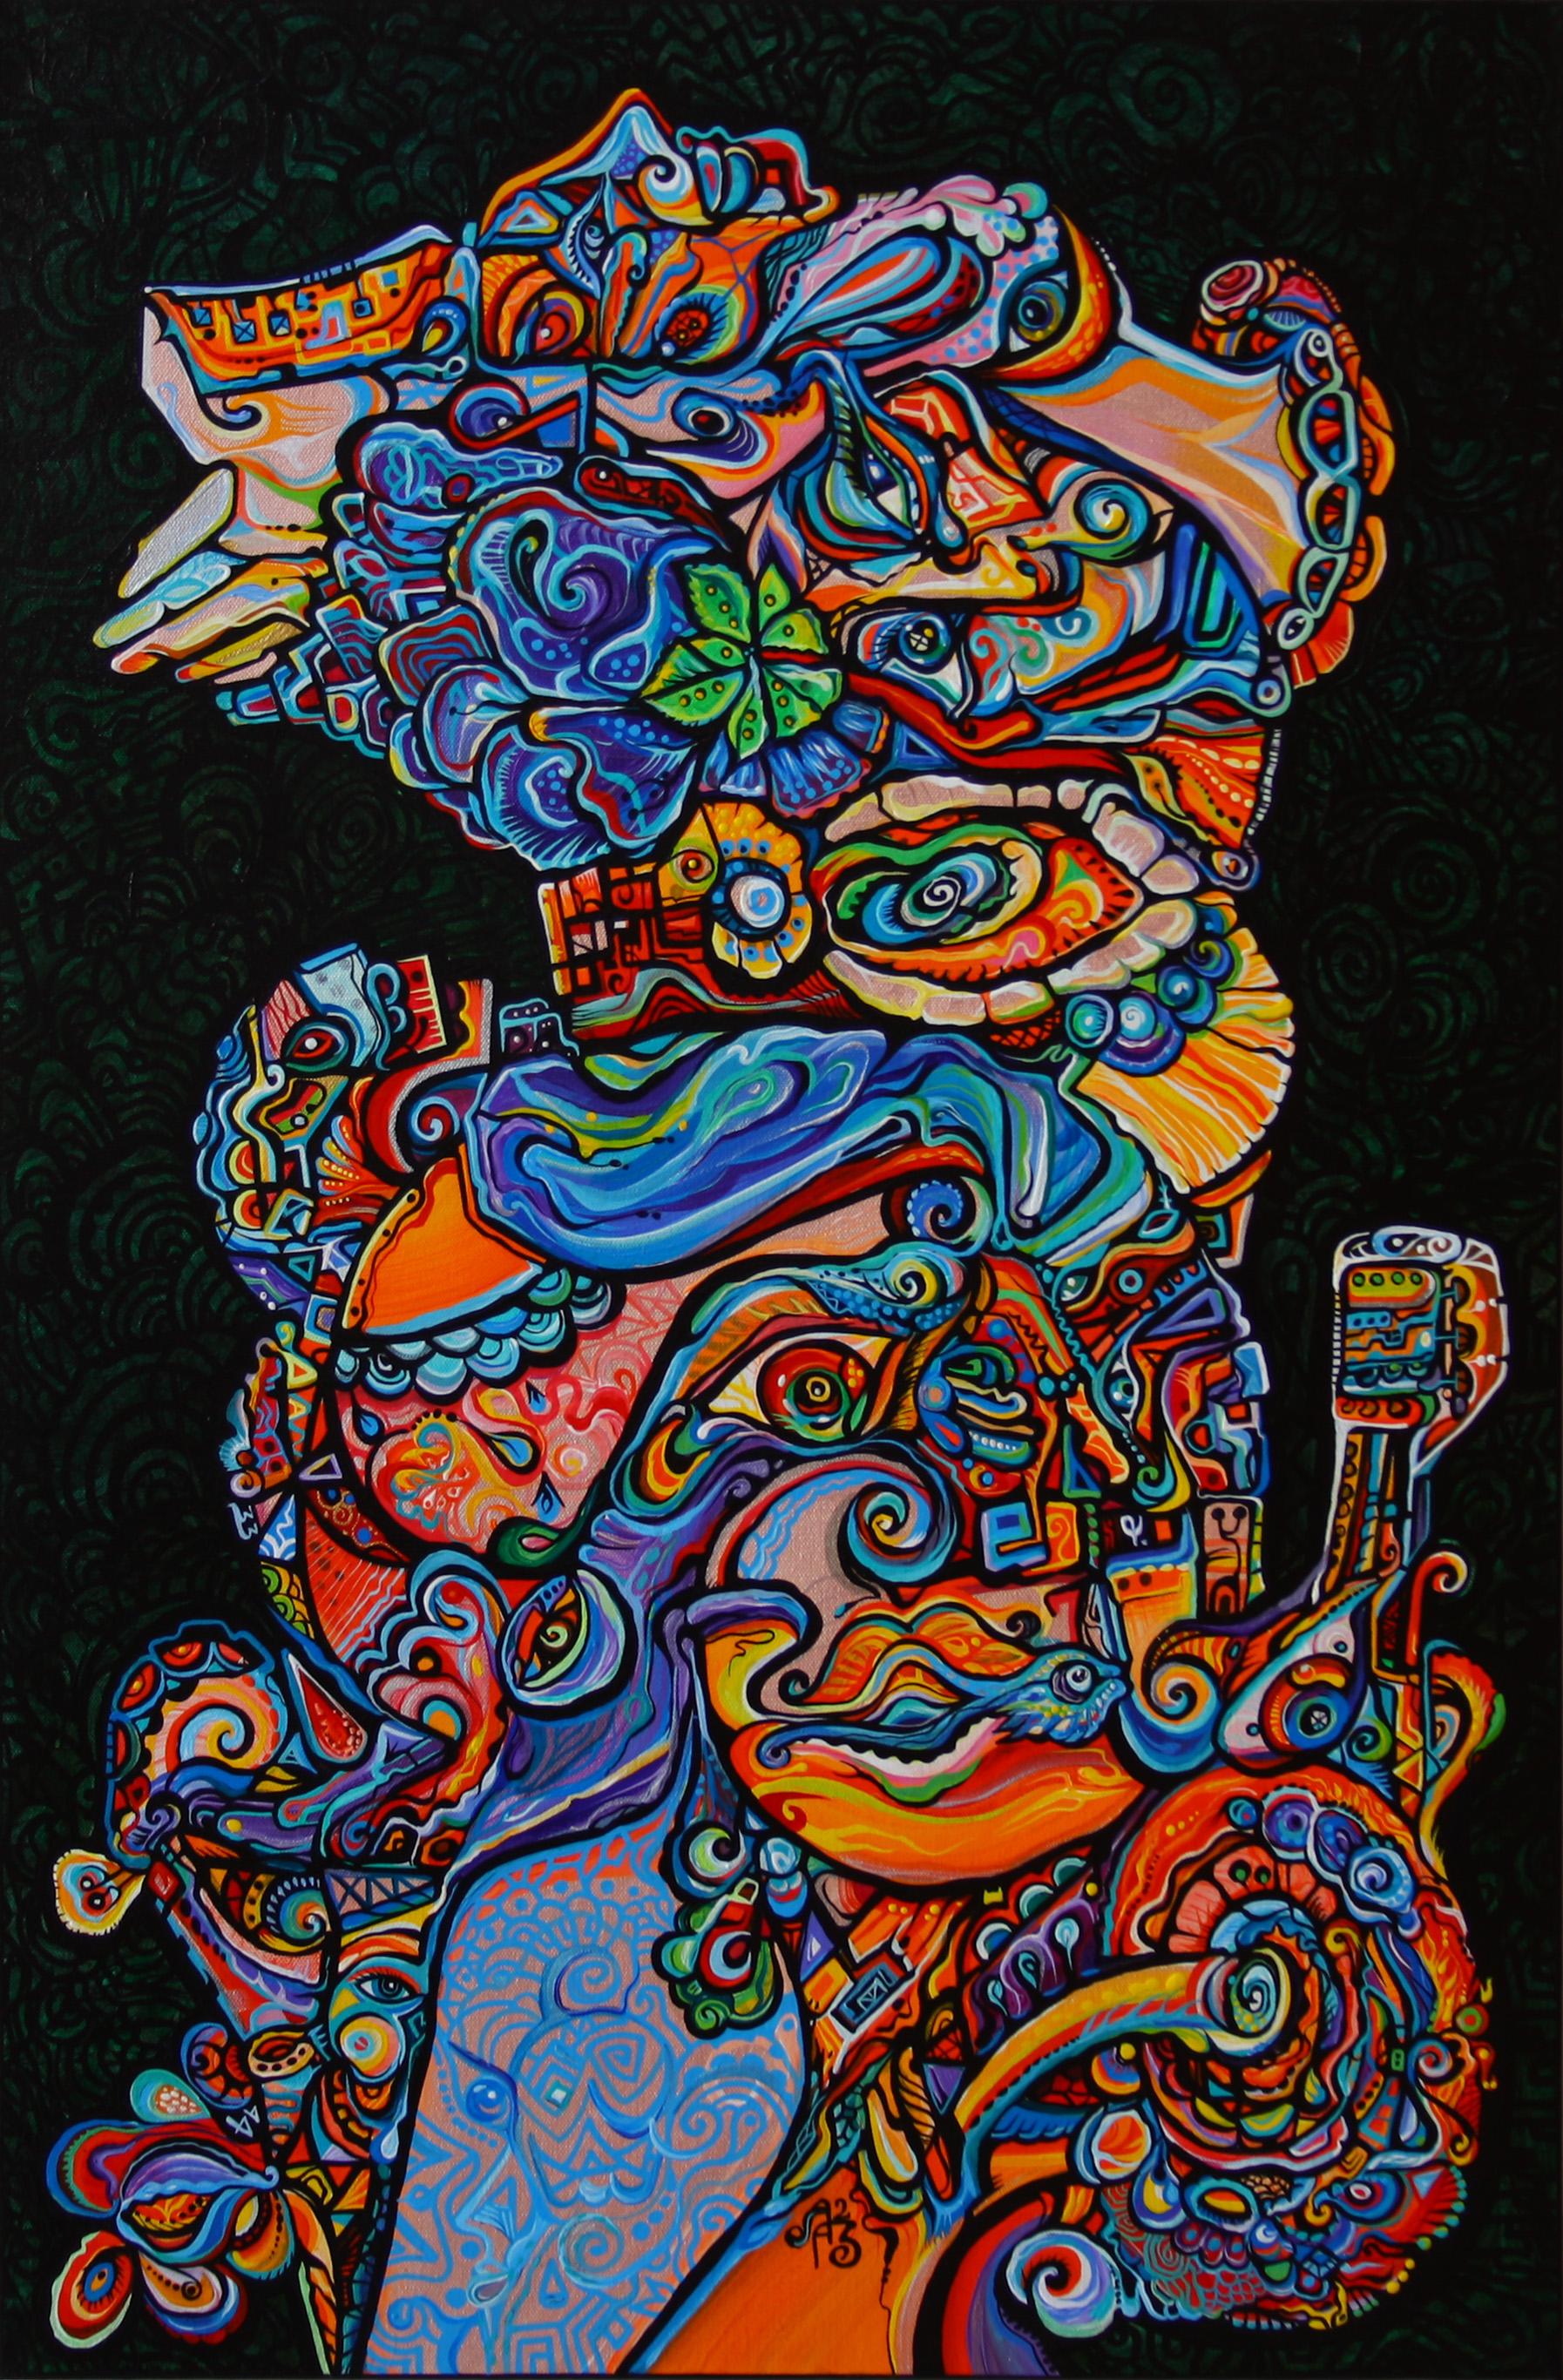 Alexander Arshansky Abstract Painting - Biomorphic Cubist Painting, "Day Dreamer"